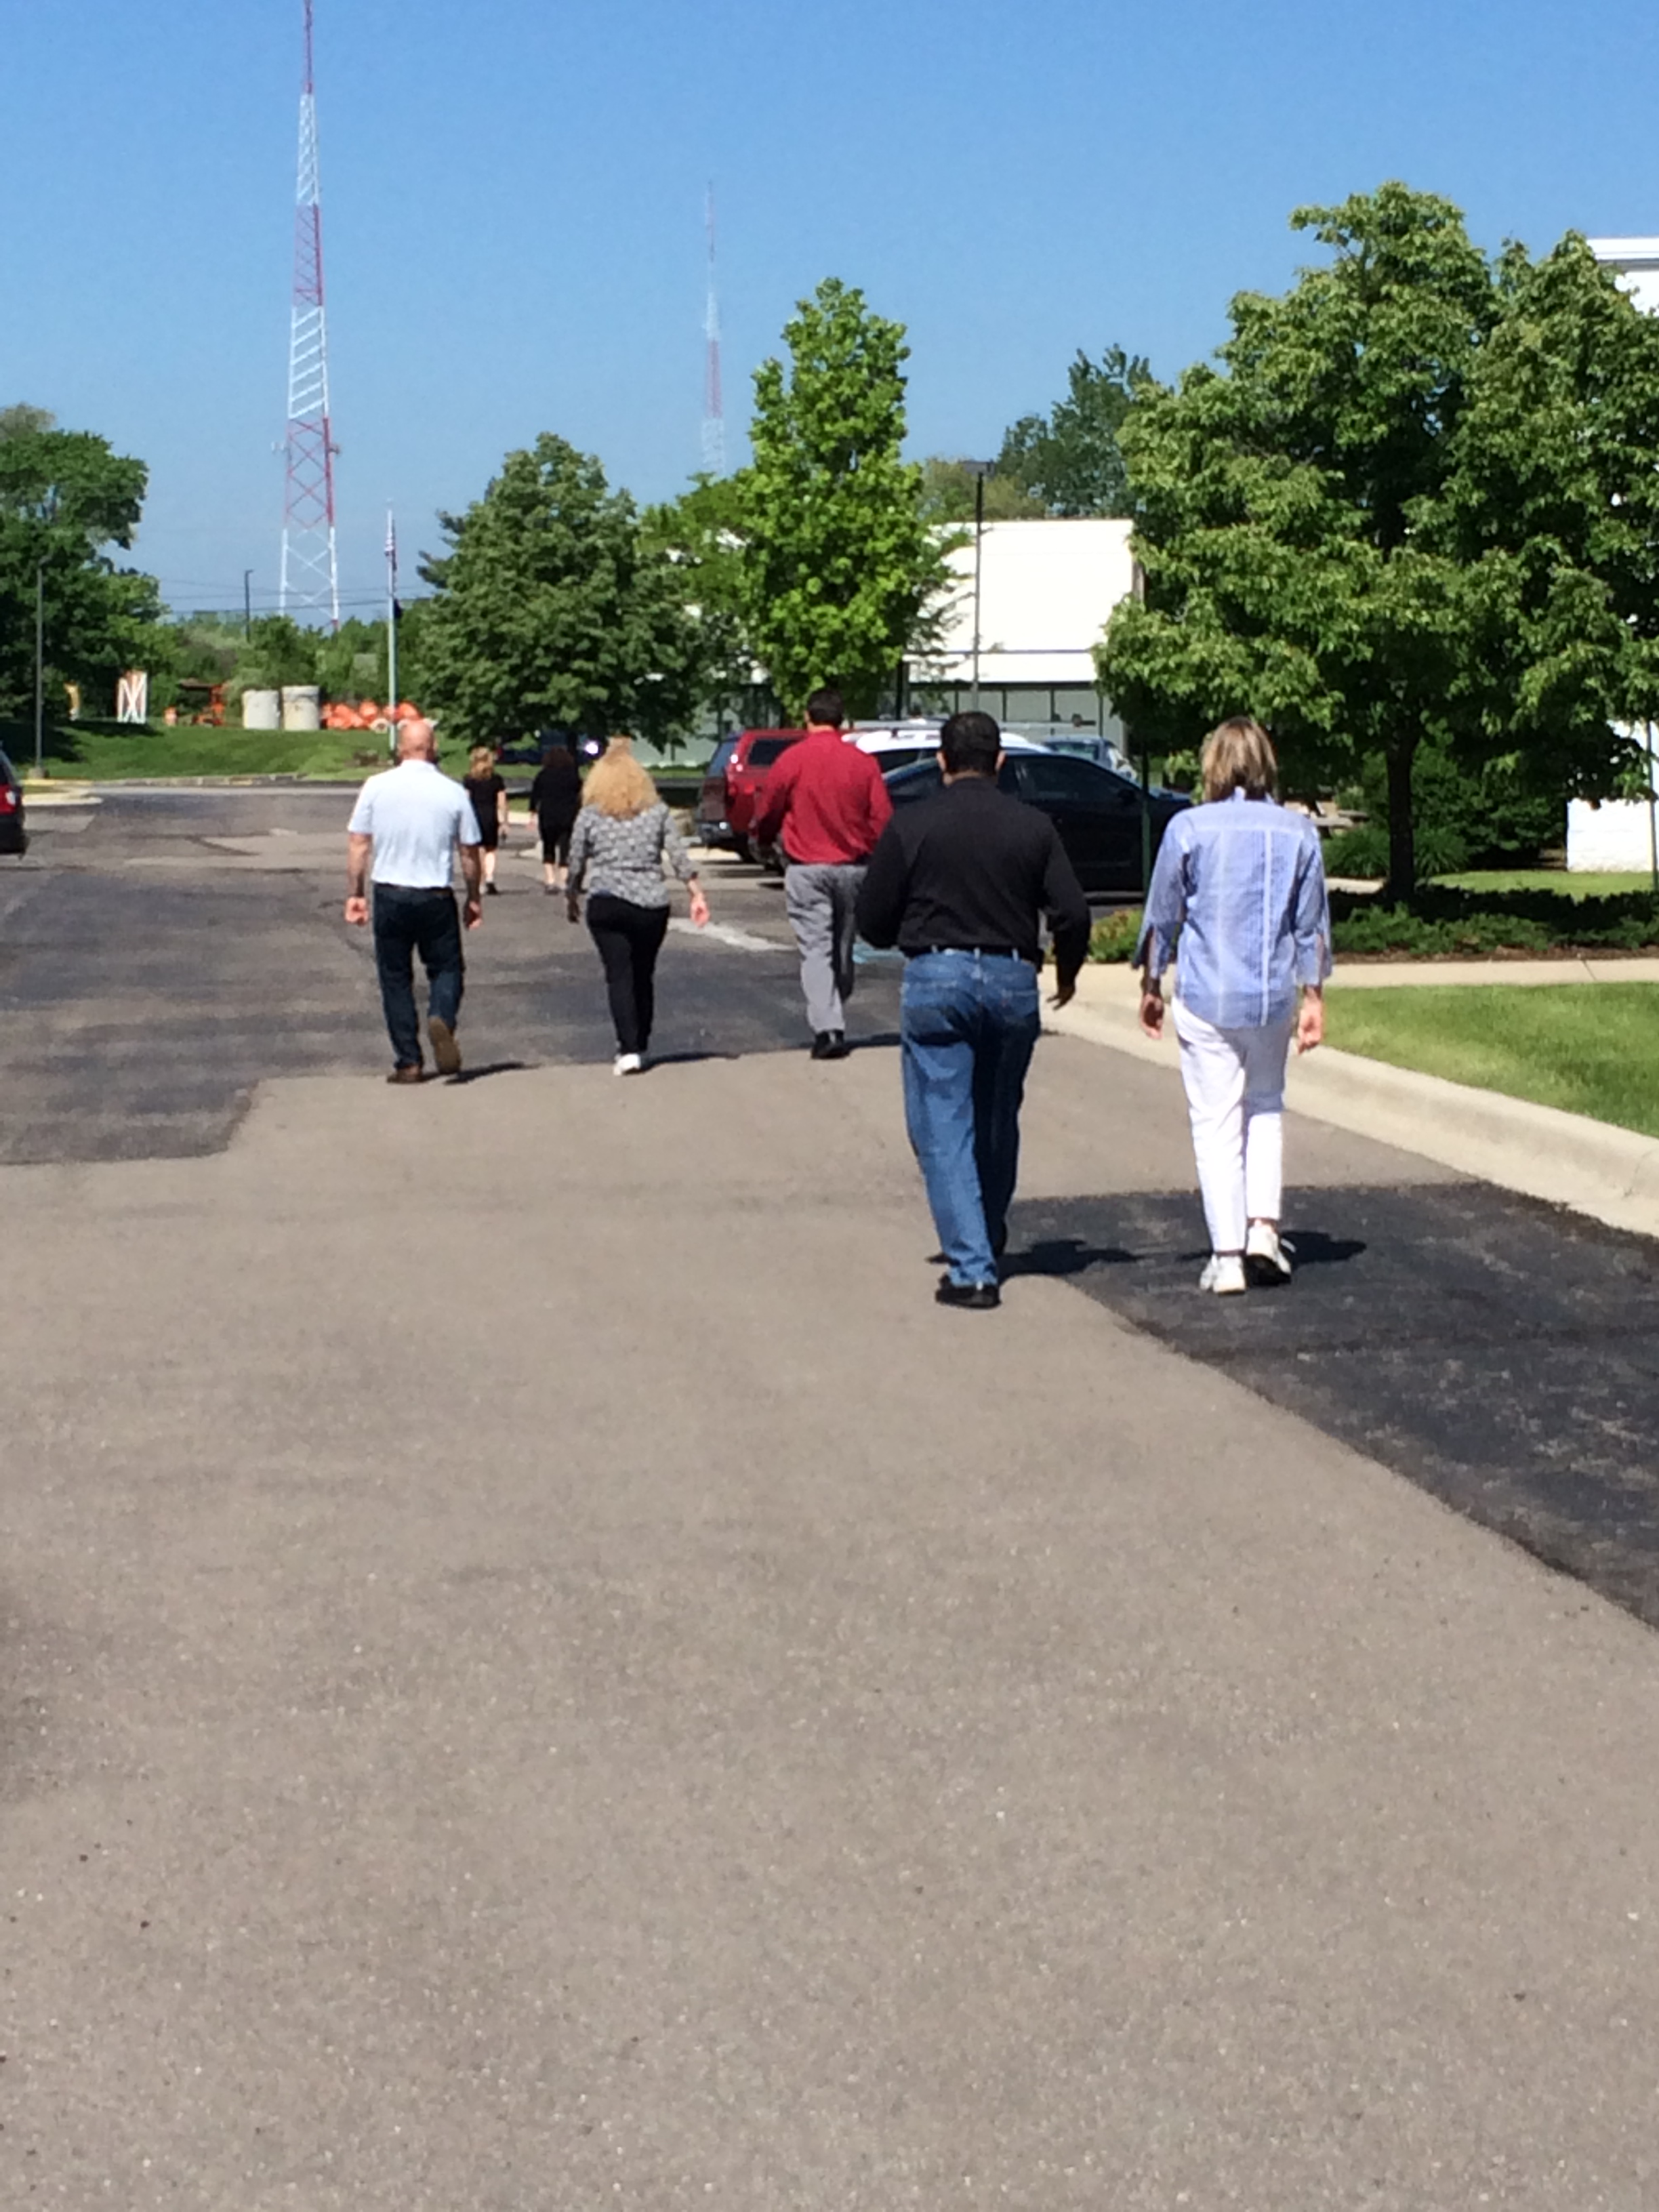 A walking meeting can boost productivity and improve your health.